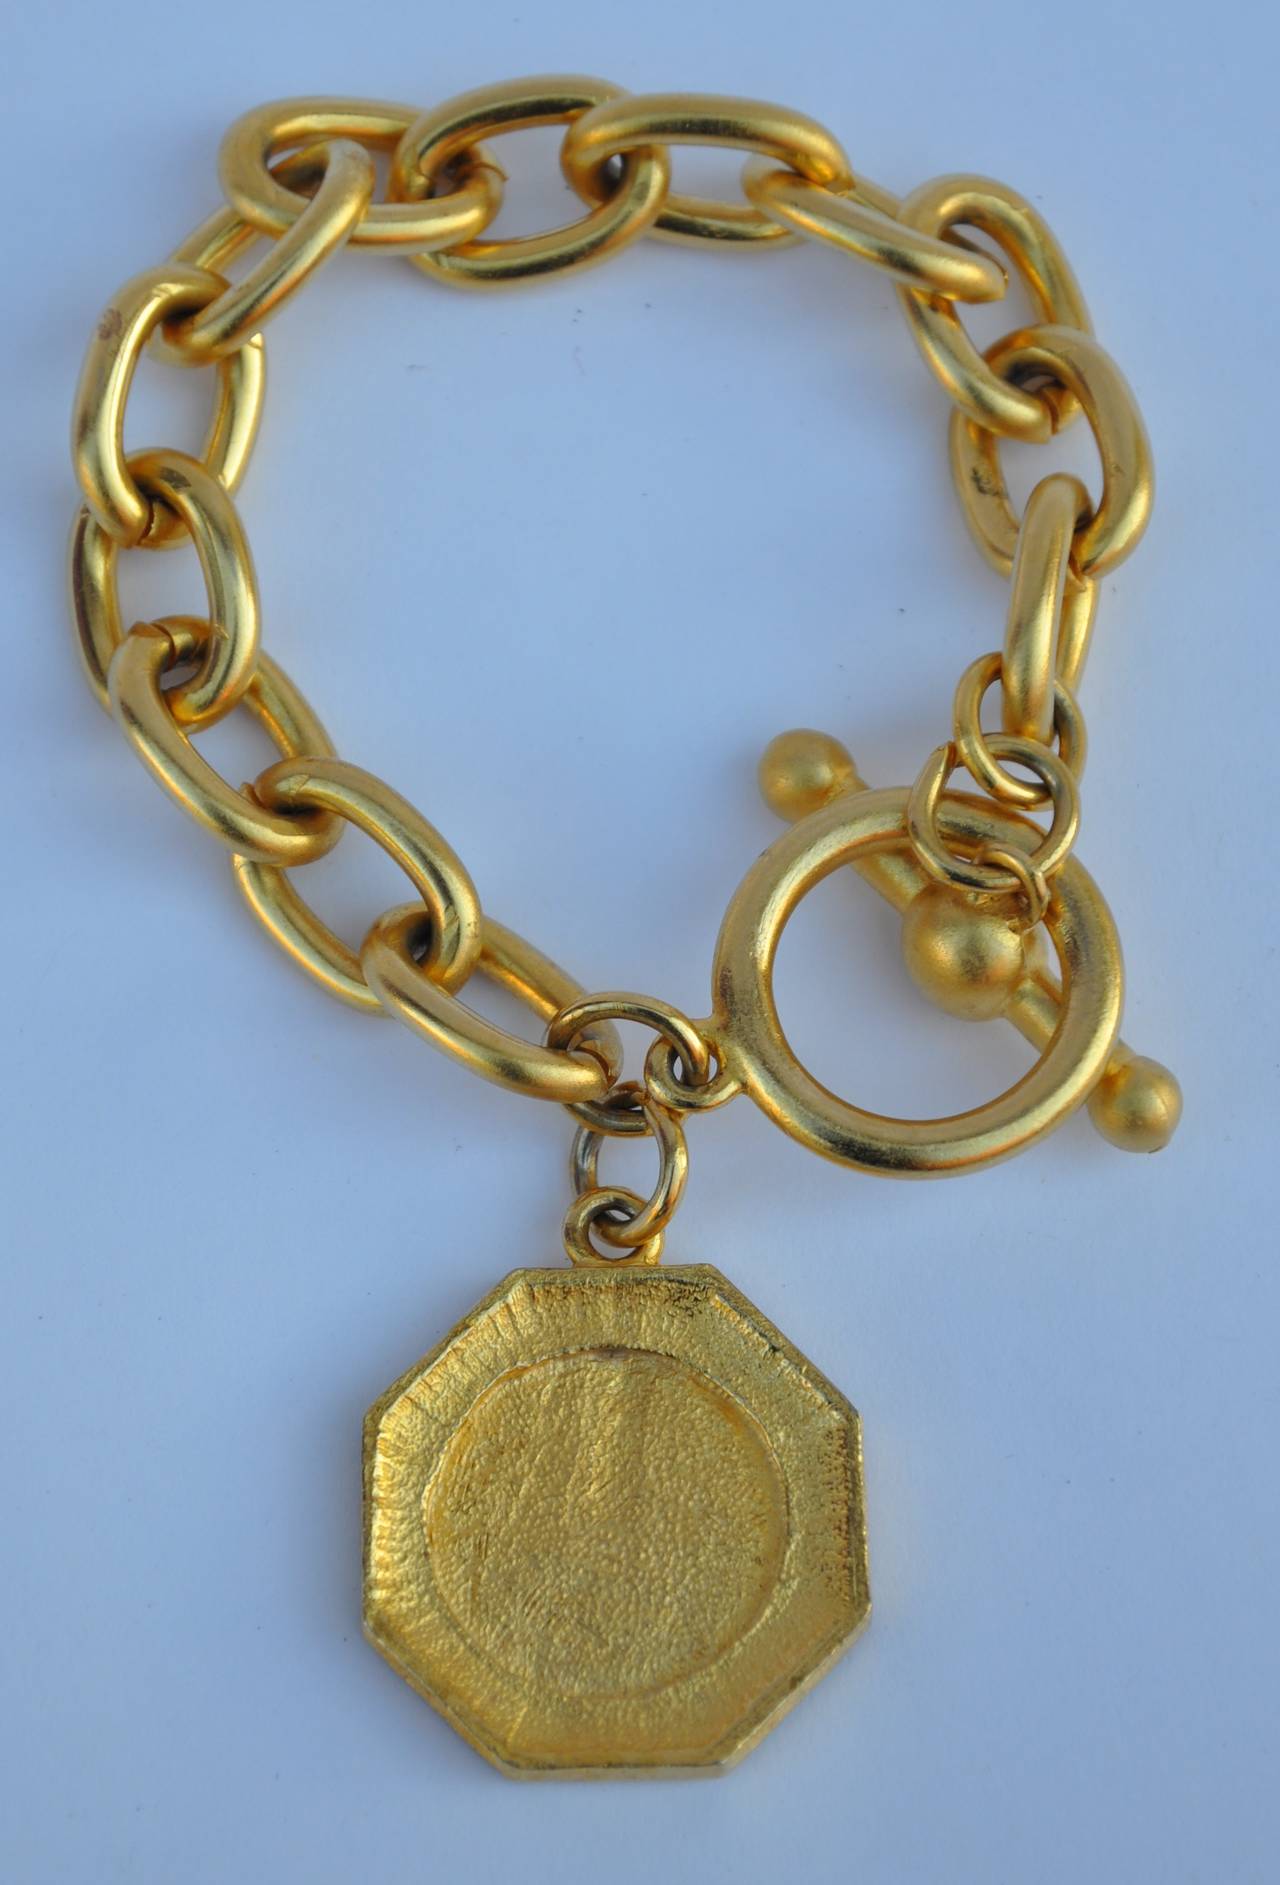 Gilded gold with vermeil finish chain bracelet is accented with a "Gold Coin". The bracelet measures 7 1/2" in length, width is 3/8".